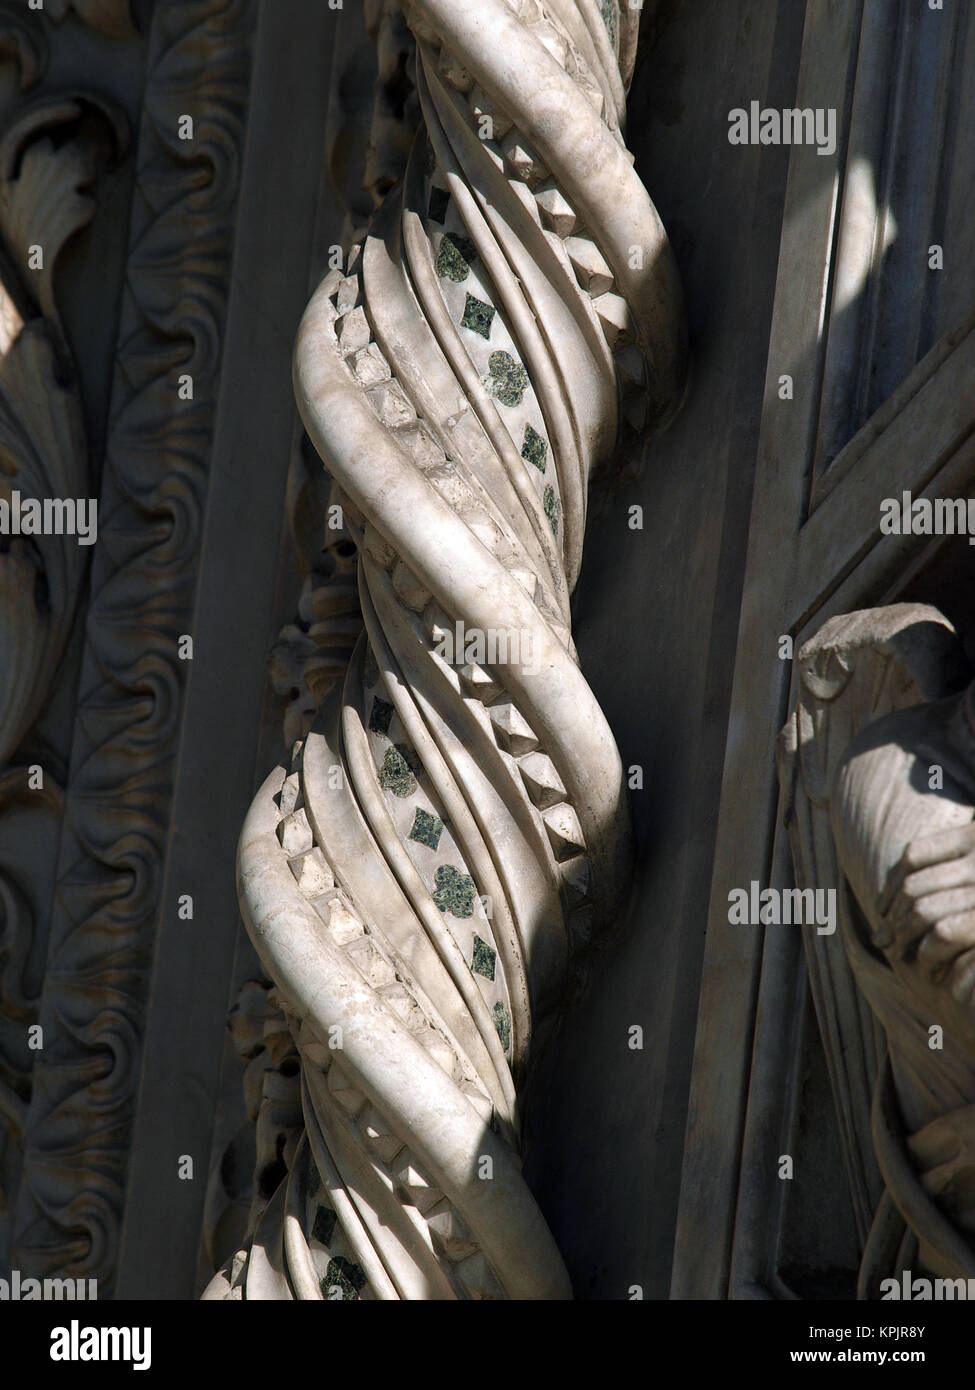 Florence - elaborate decorations of the portal on the Duomo facade Stock Photo